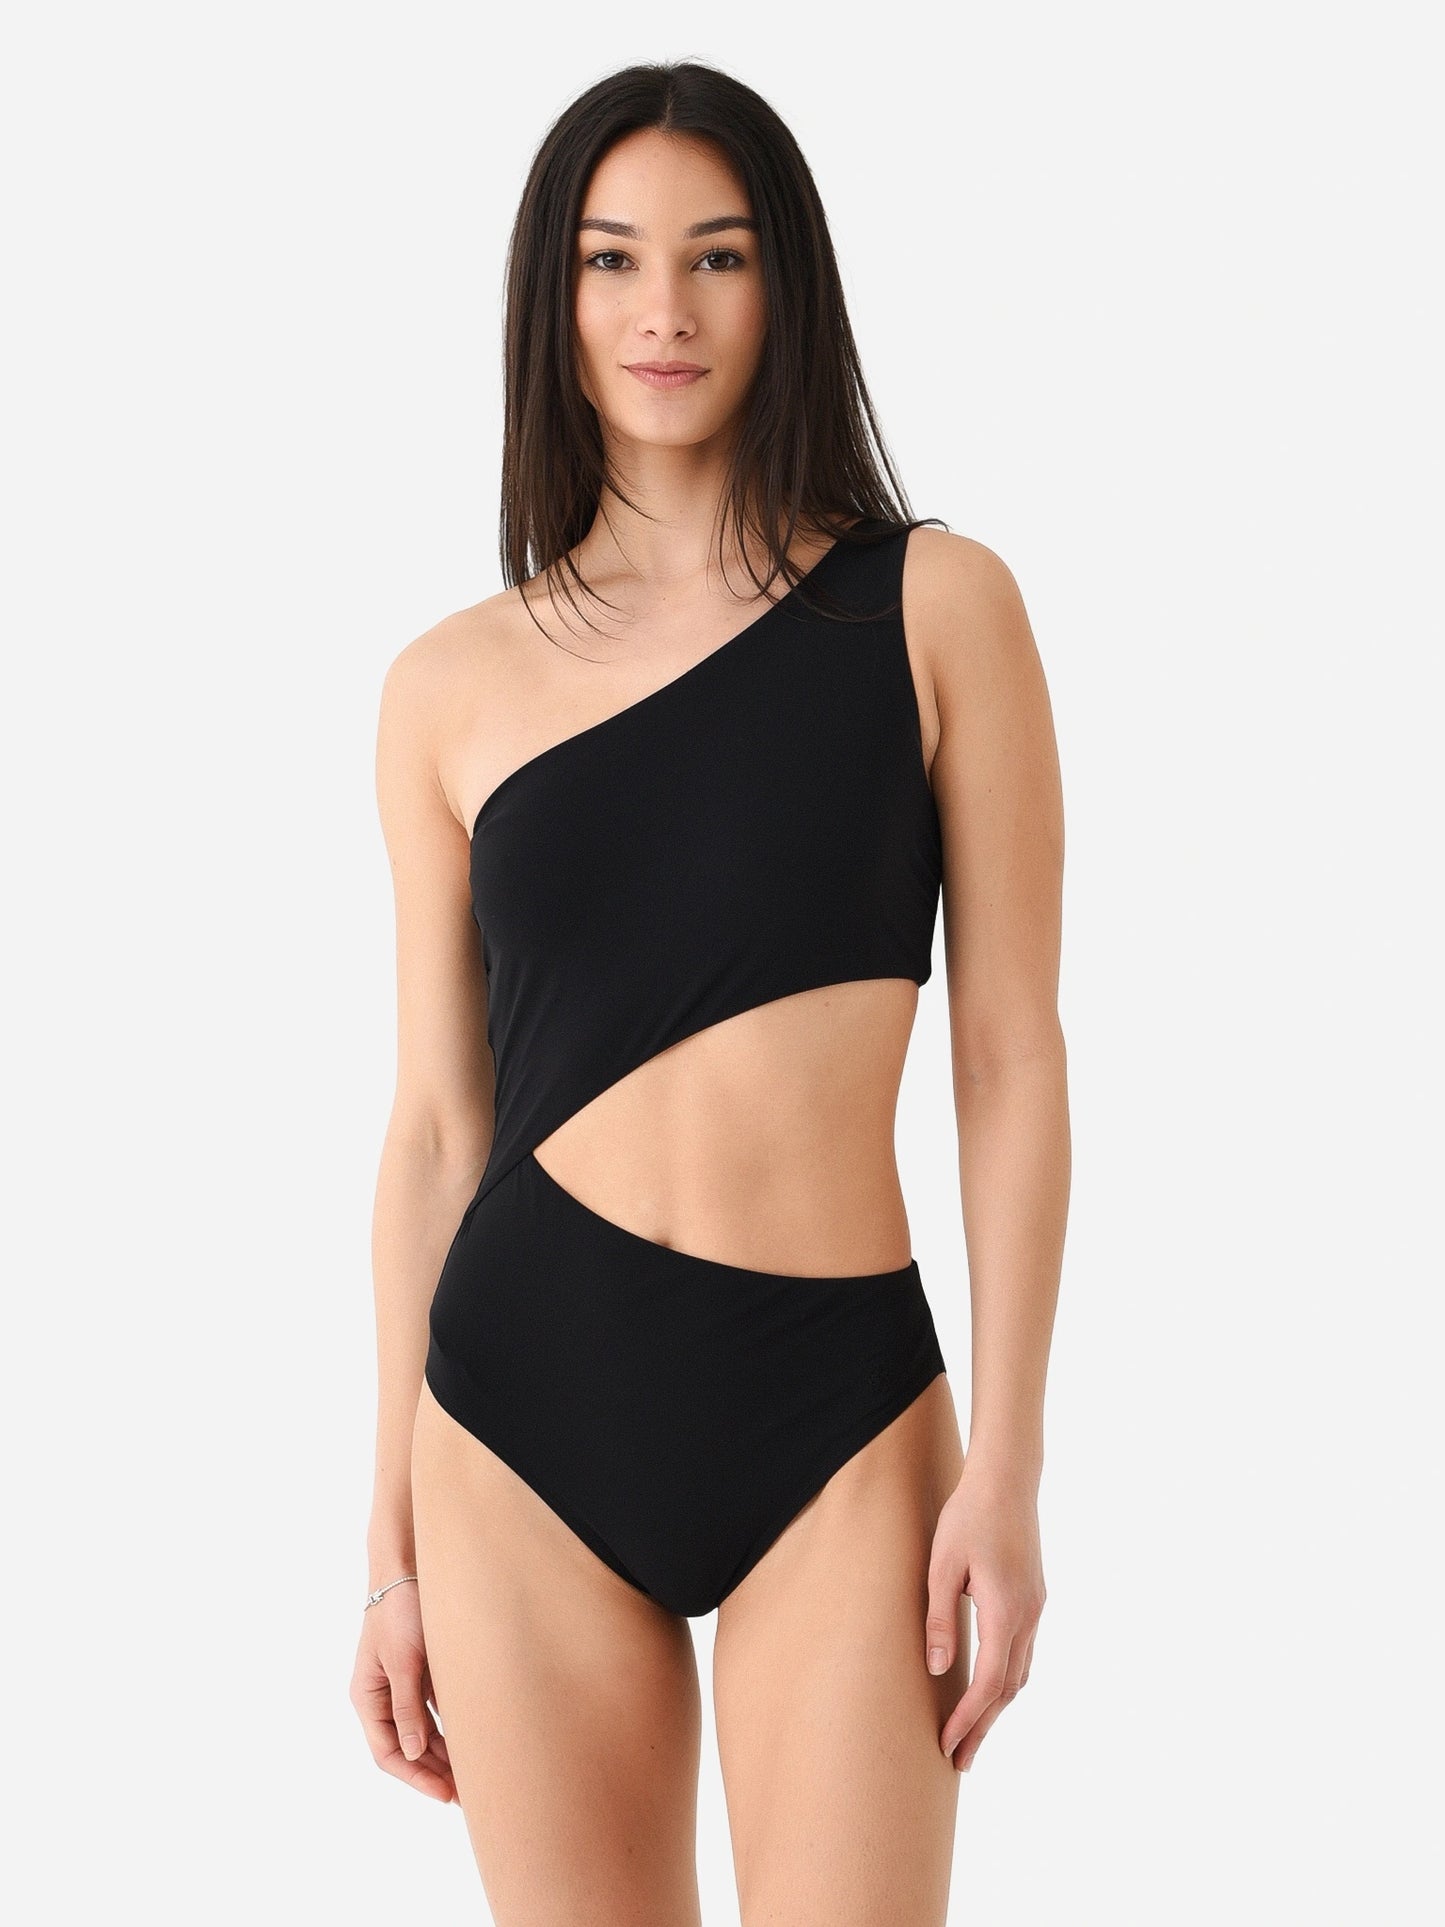 Tory Burch Women's Cut-Out One-Piece Swimsuit